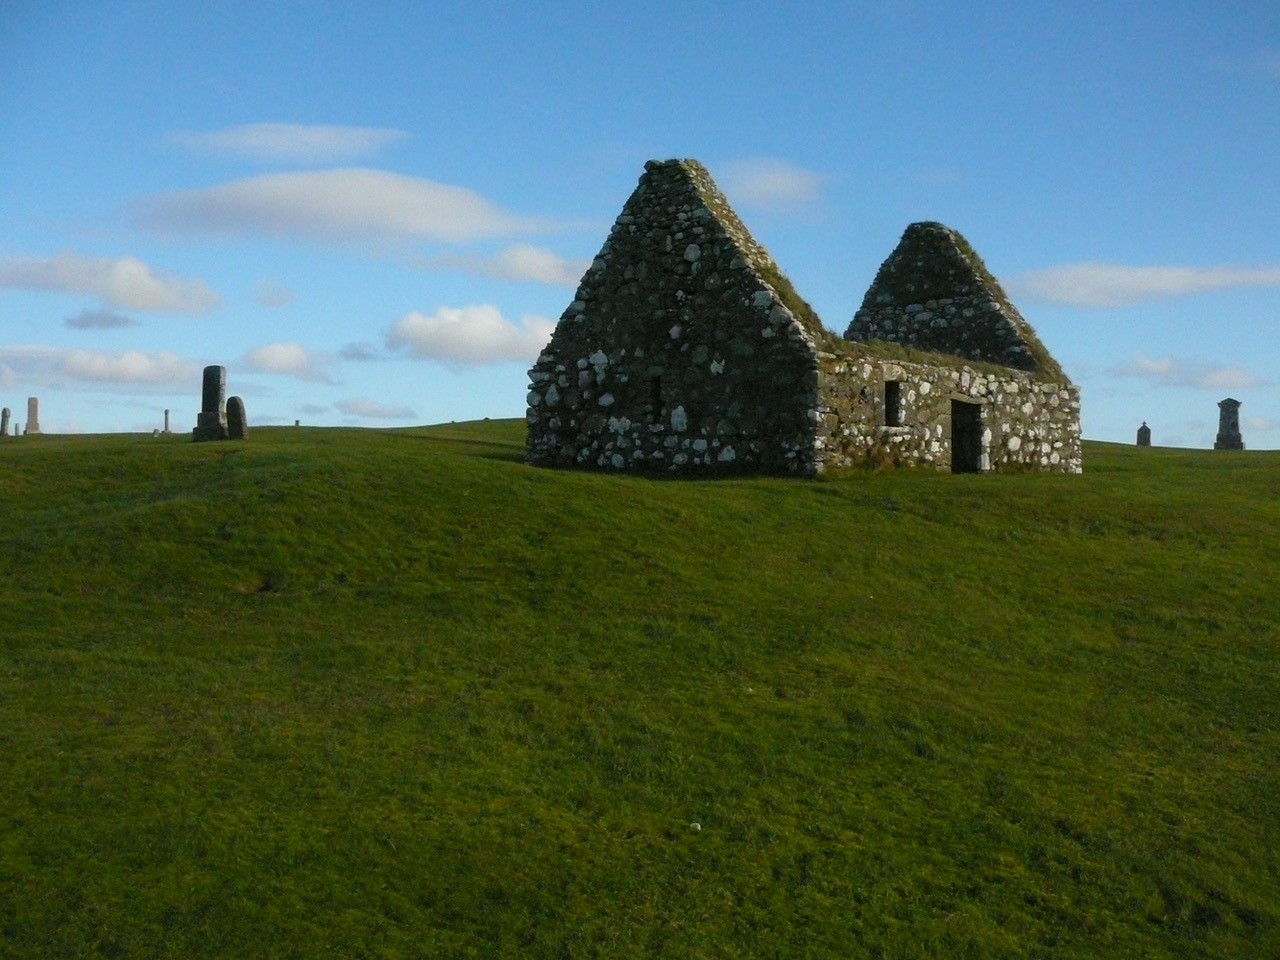 stone chapel on a grassy land with blue skies